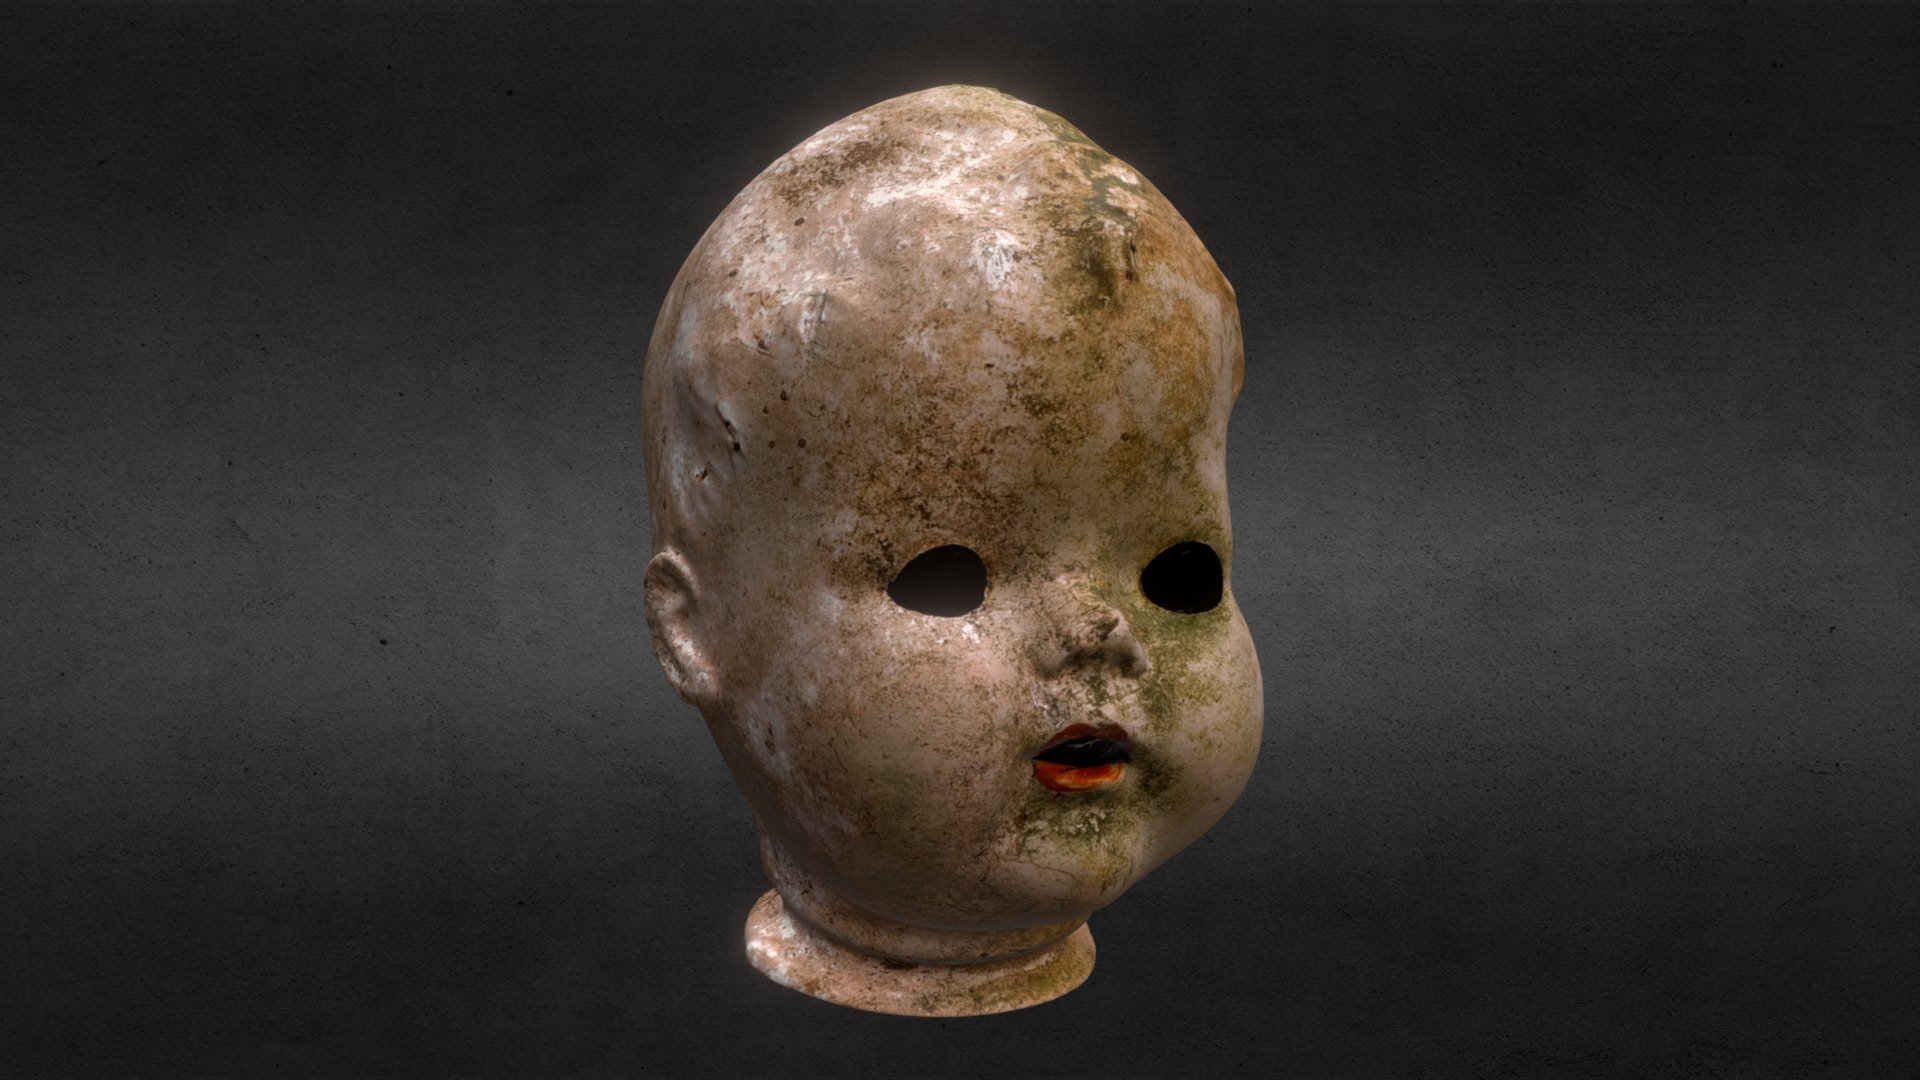 This antique doll head was found in the woods behind my house.
Created using 4K video exported to image sequences 3d model